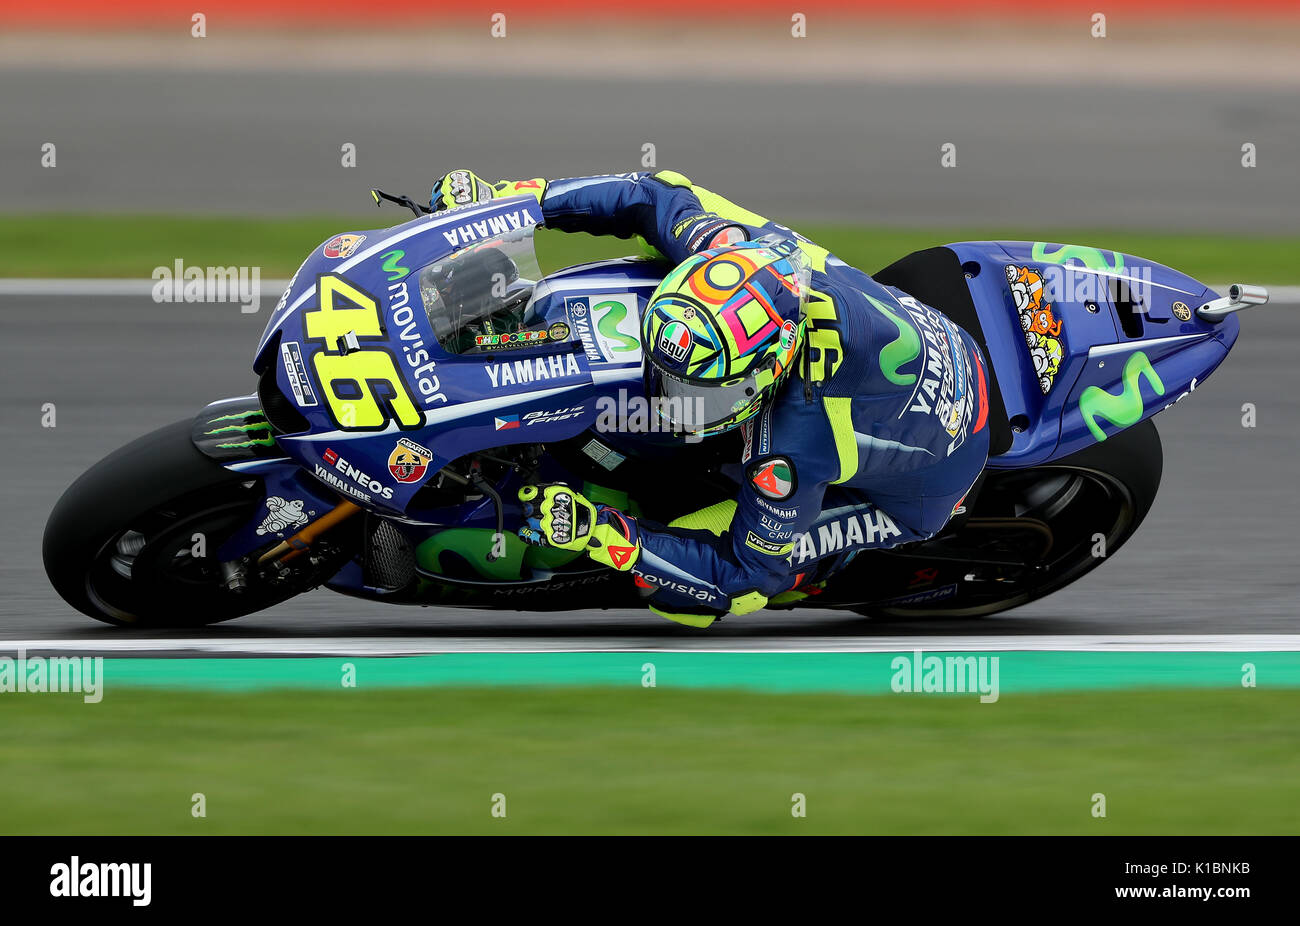 Movistar Yamaha's Valentino Rossi during qualifying ahead of the ...